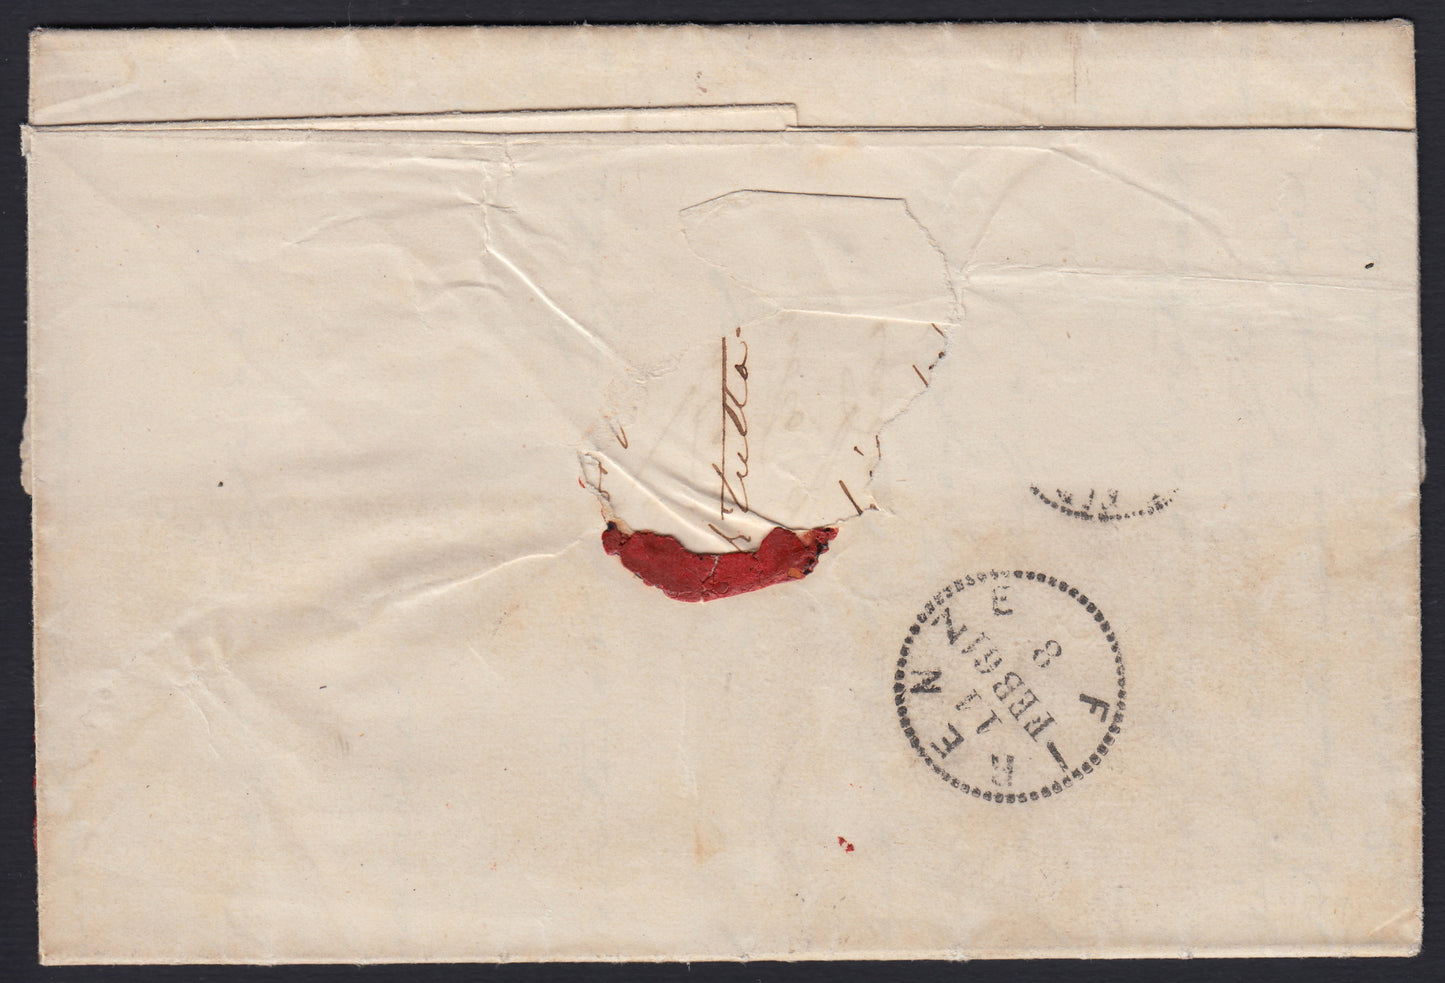 166 - 1861 - Letter sent from Pisa to Florence 11/2/61 canceled with the Prato diamond mute in transit and then sent back to Pisa. (14Bd). 